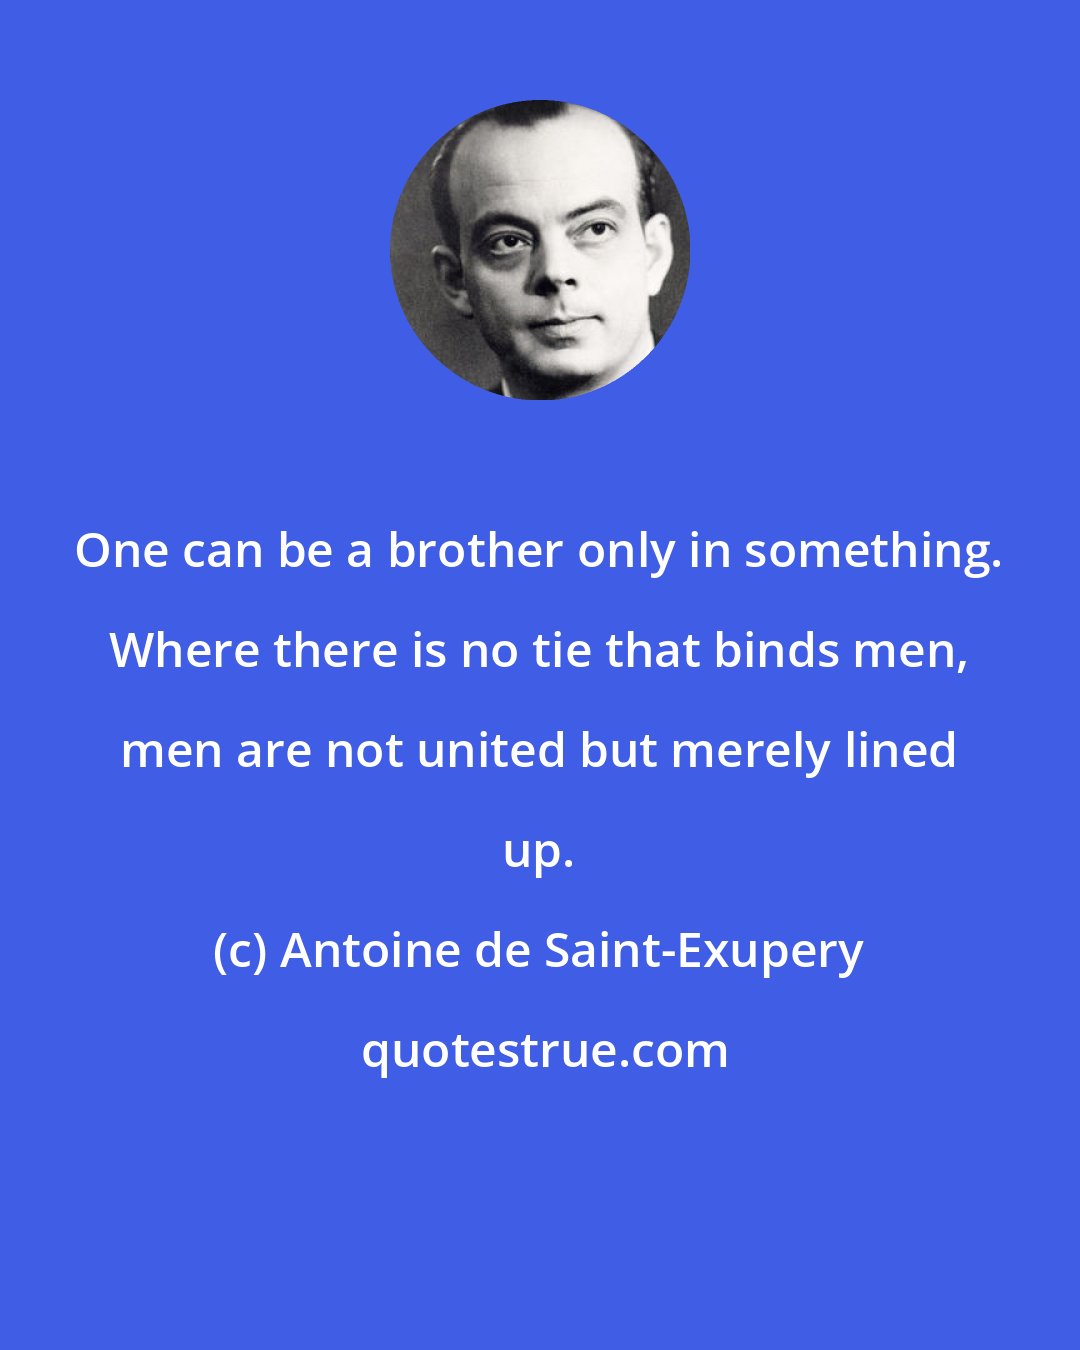 Antoine de Saint-Exupery: One can be a brother only in something. Where there is no tie that binds men, men are not united but merely lined up.